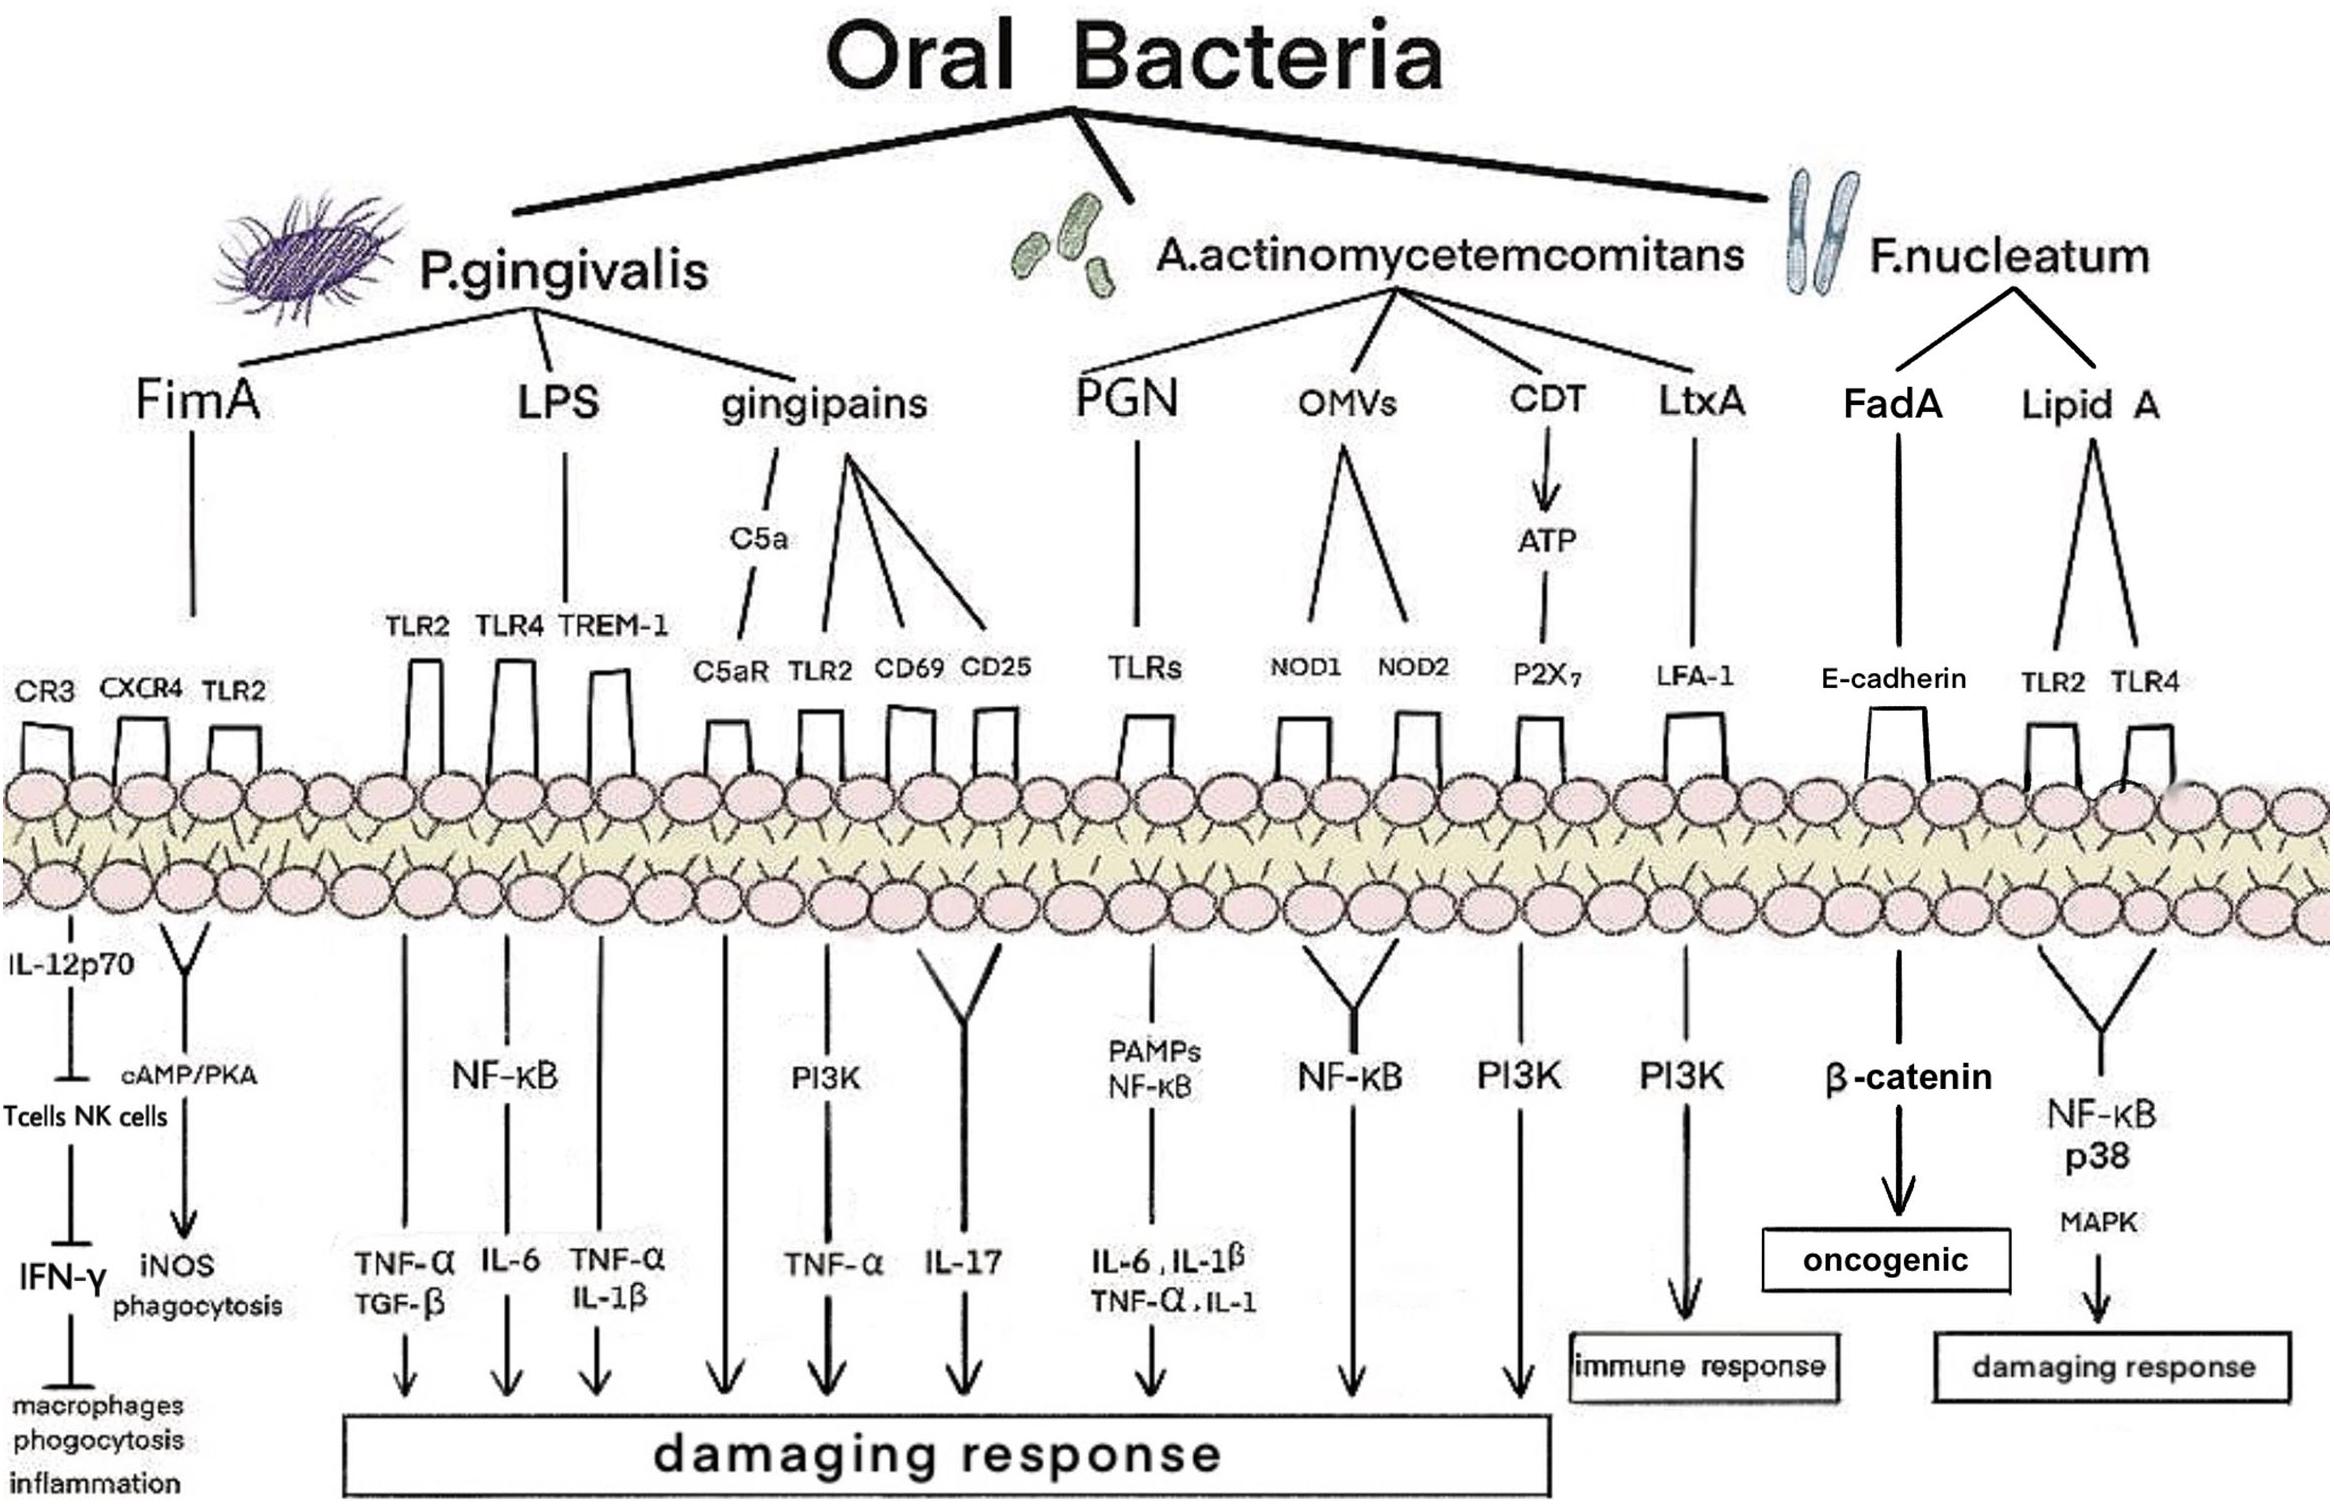 Frontiers Periodontitis Exacerbates And Promotes The Progression Of Chronic Kidney Disease Through Oral Flora Cytokines And Oxidative Stress Microbiology